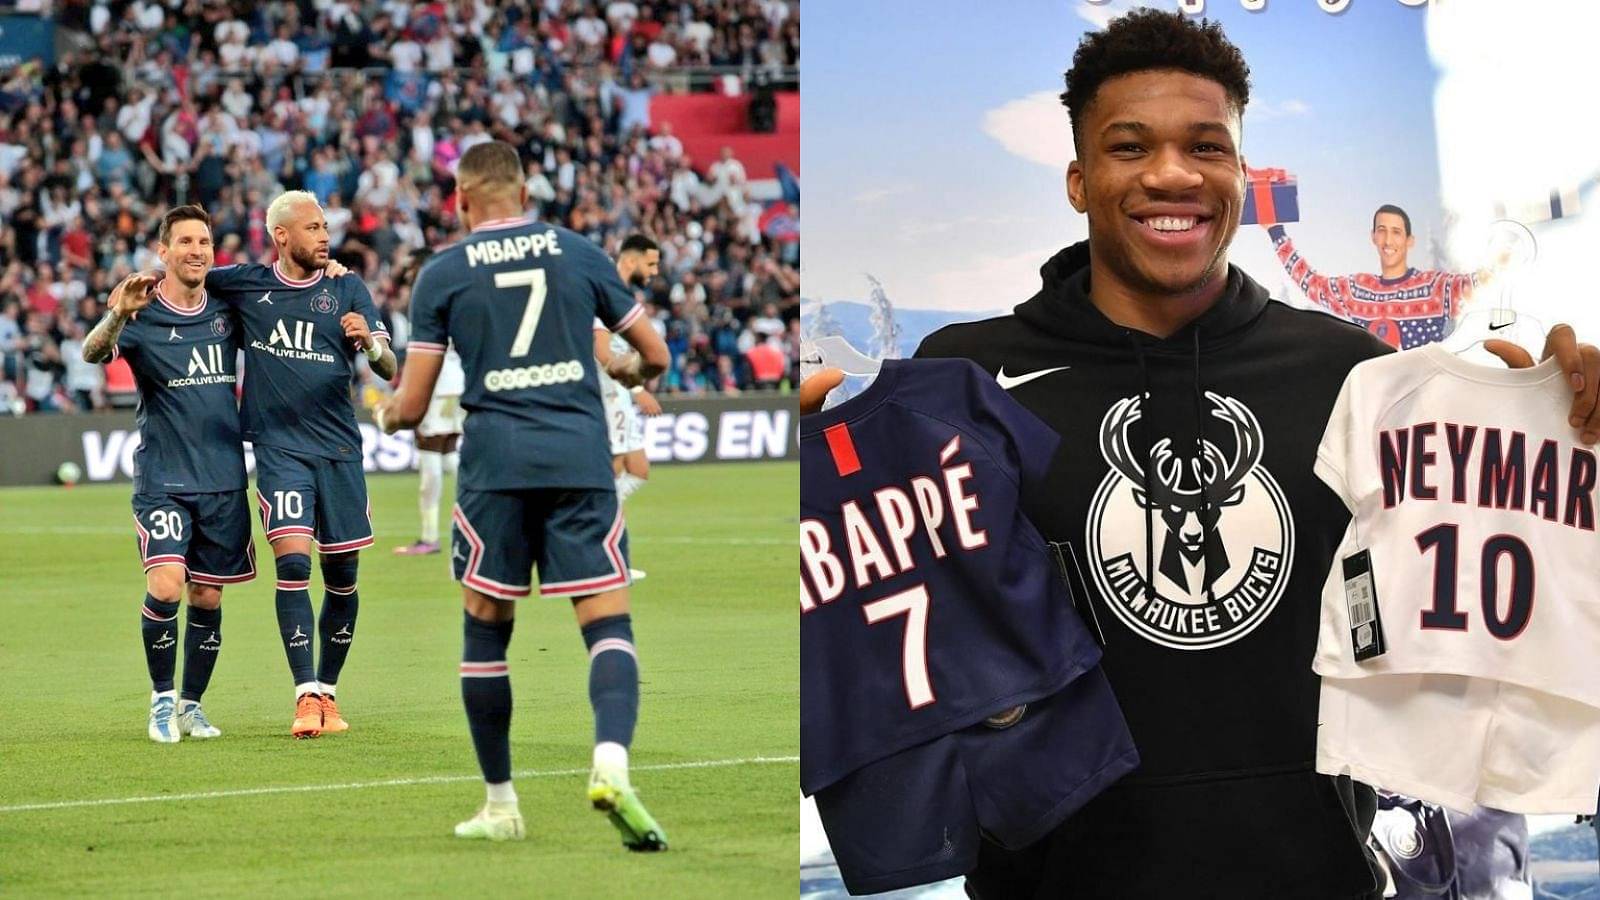 "Hey, Neymar & Mbappe!! Let me be your Striker": Giannis Antetokounmpo took to Twitter to make a special request to the PSG stars